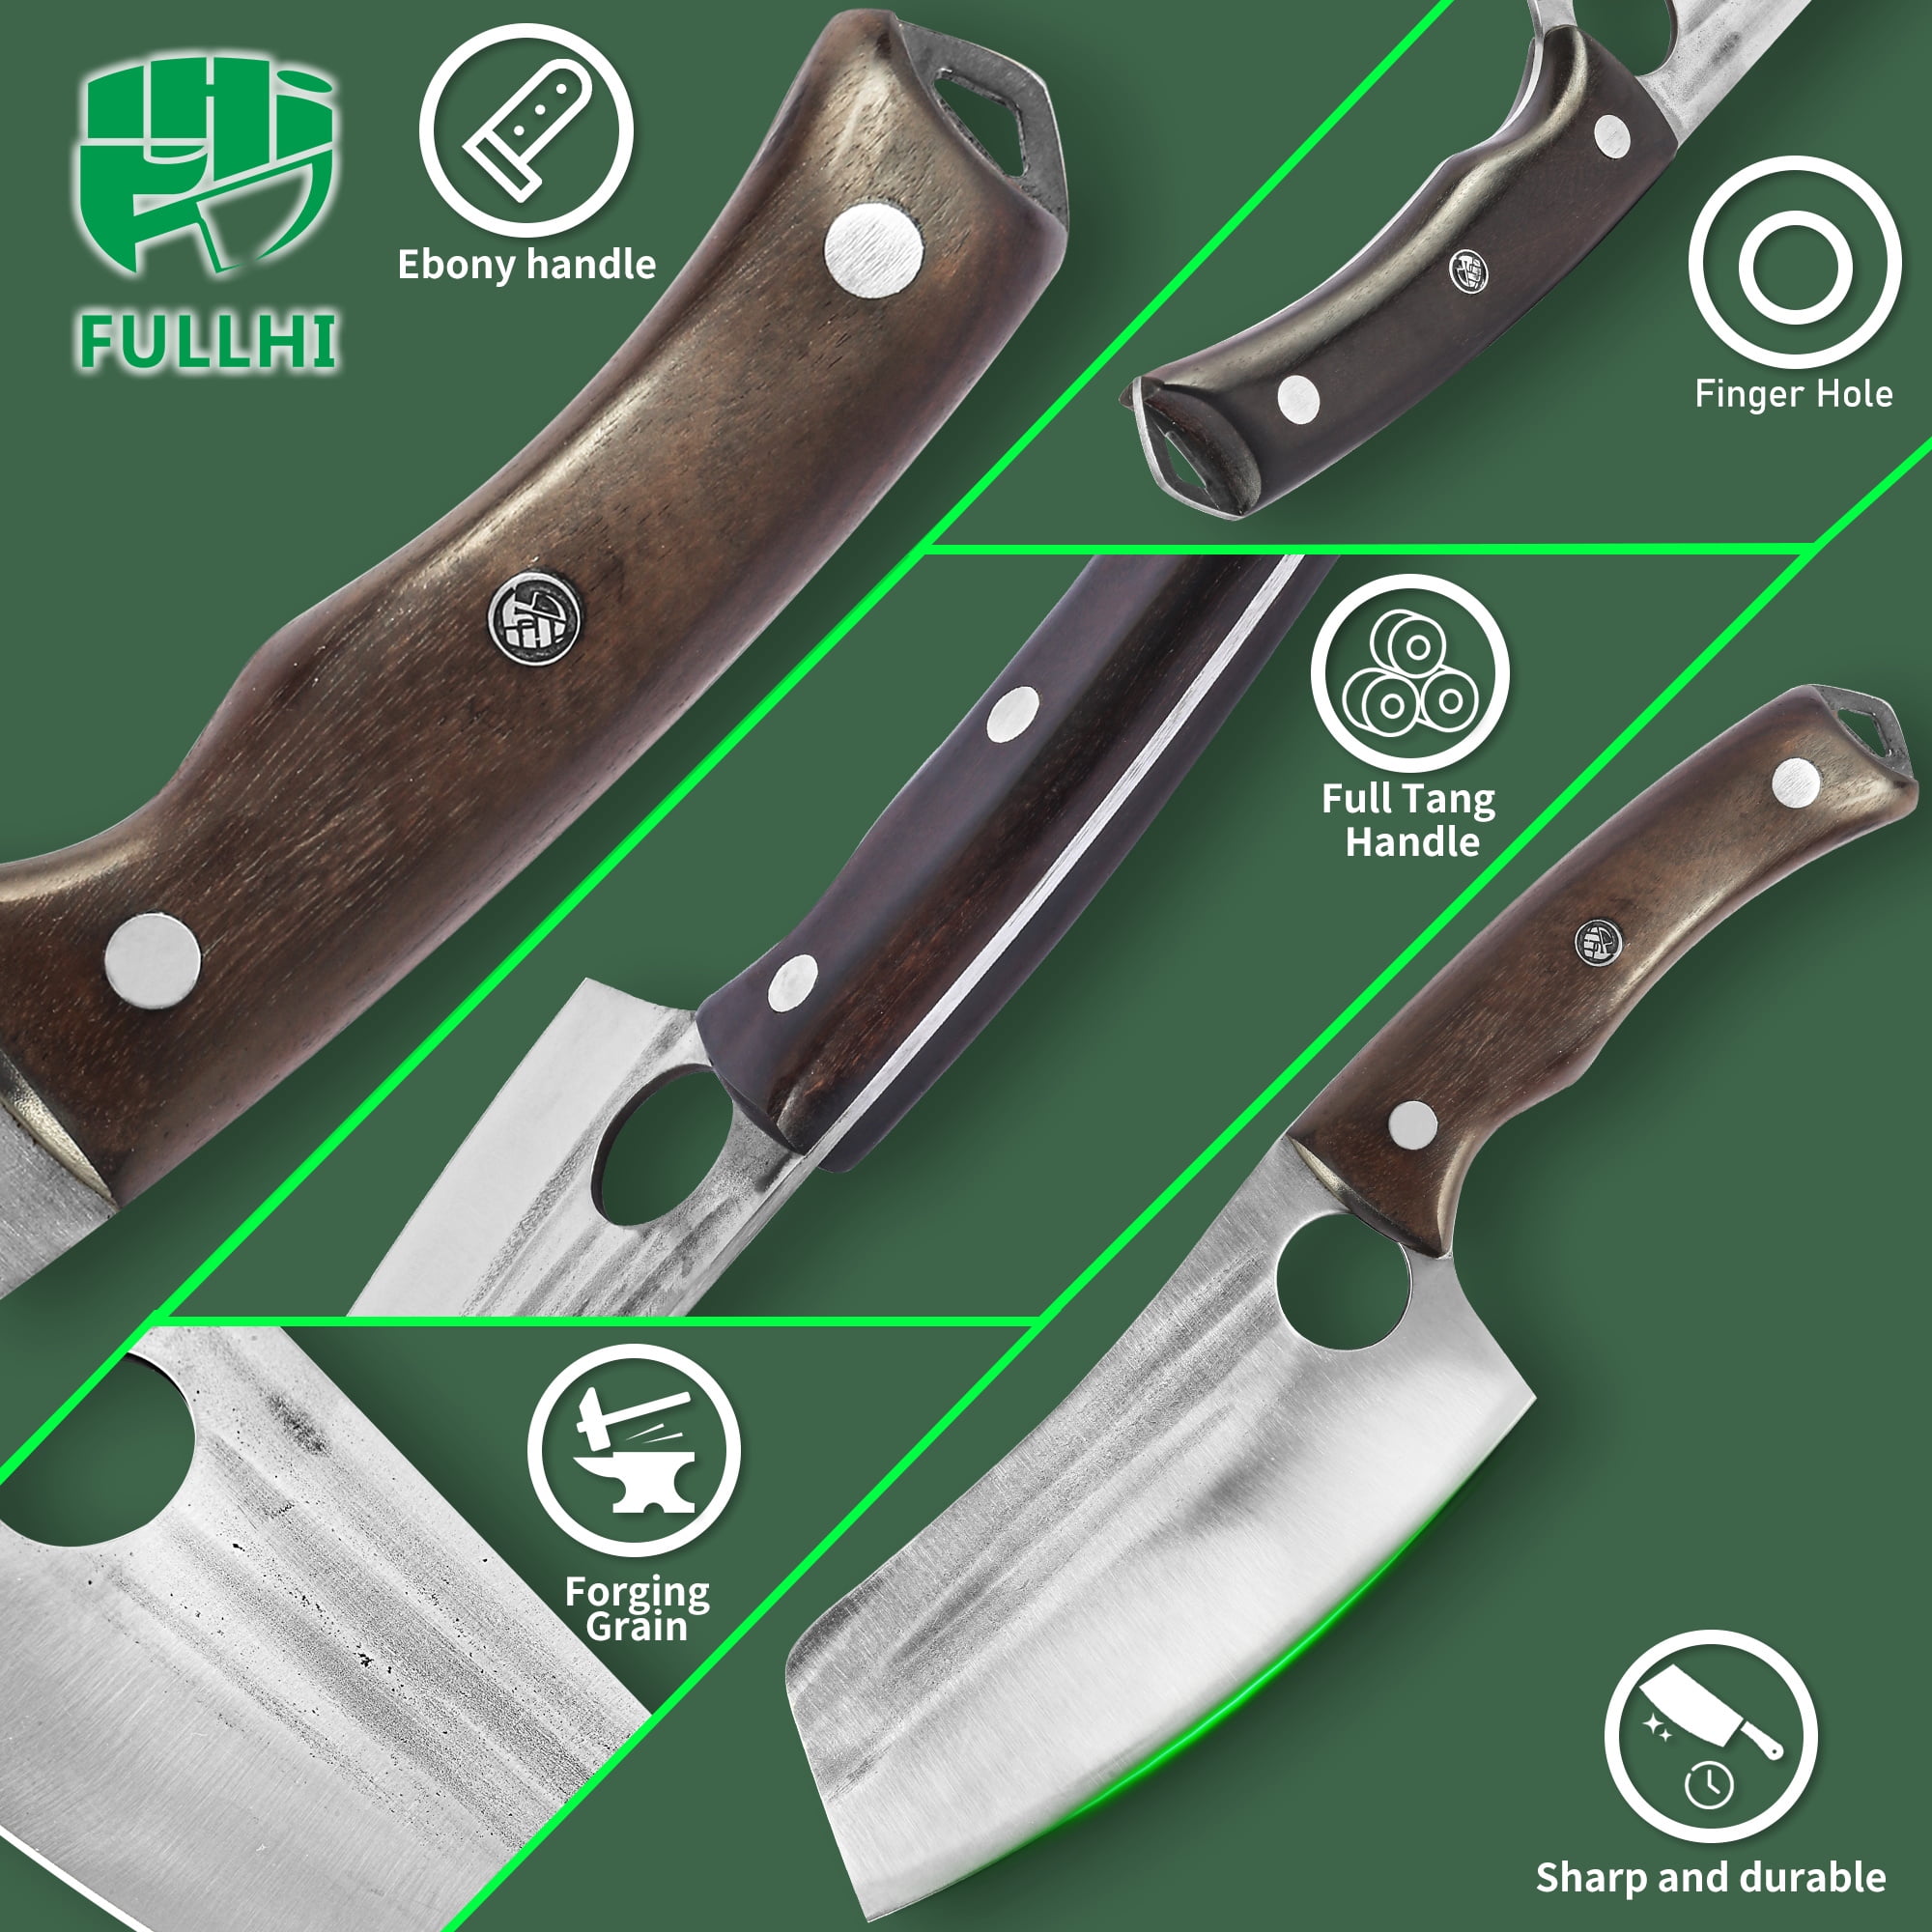  FULLHI Portable 14pcs Butcher knife set green woodhandle with  knifebag Hand Forged chef knife Boning Knife High Carbon Steel viking Knife  set For Kitchen, Camping, BBQ : Home & Kitchen